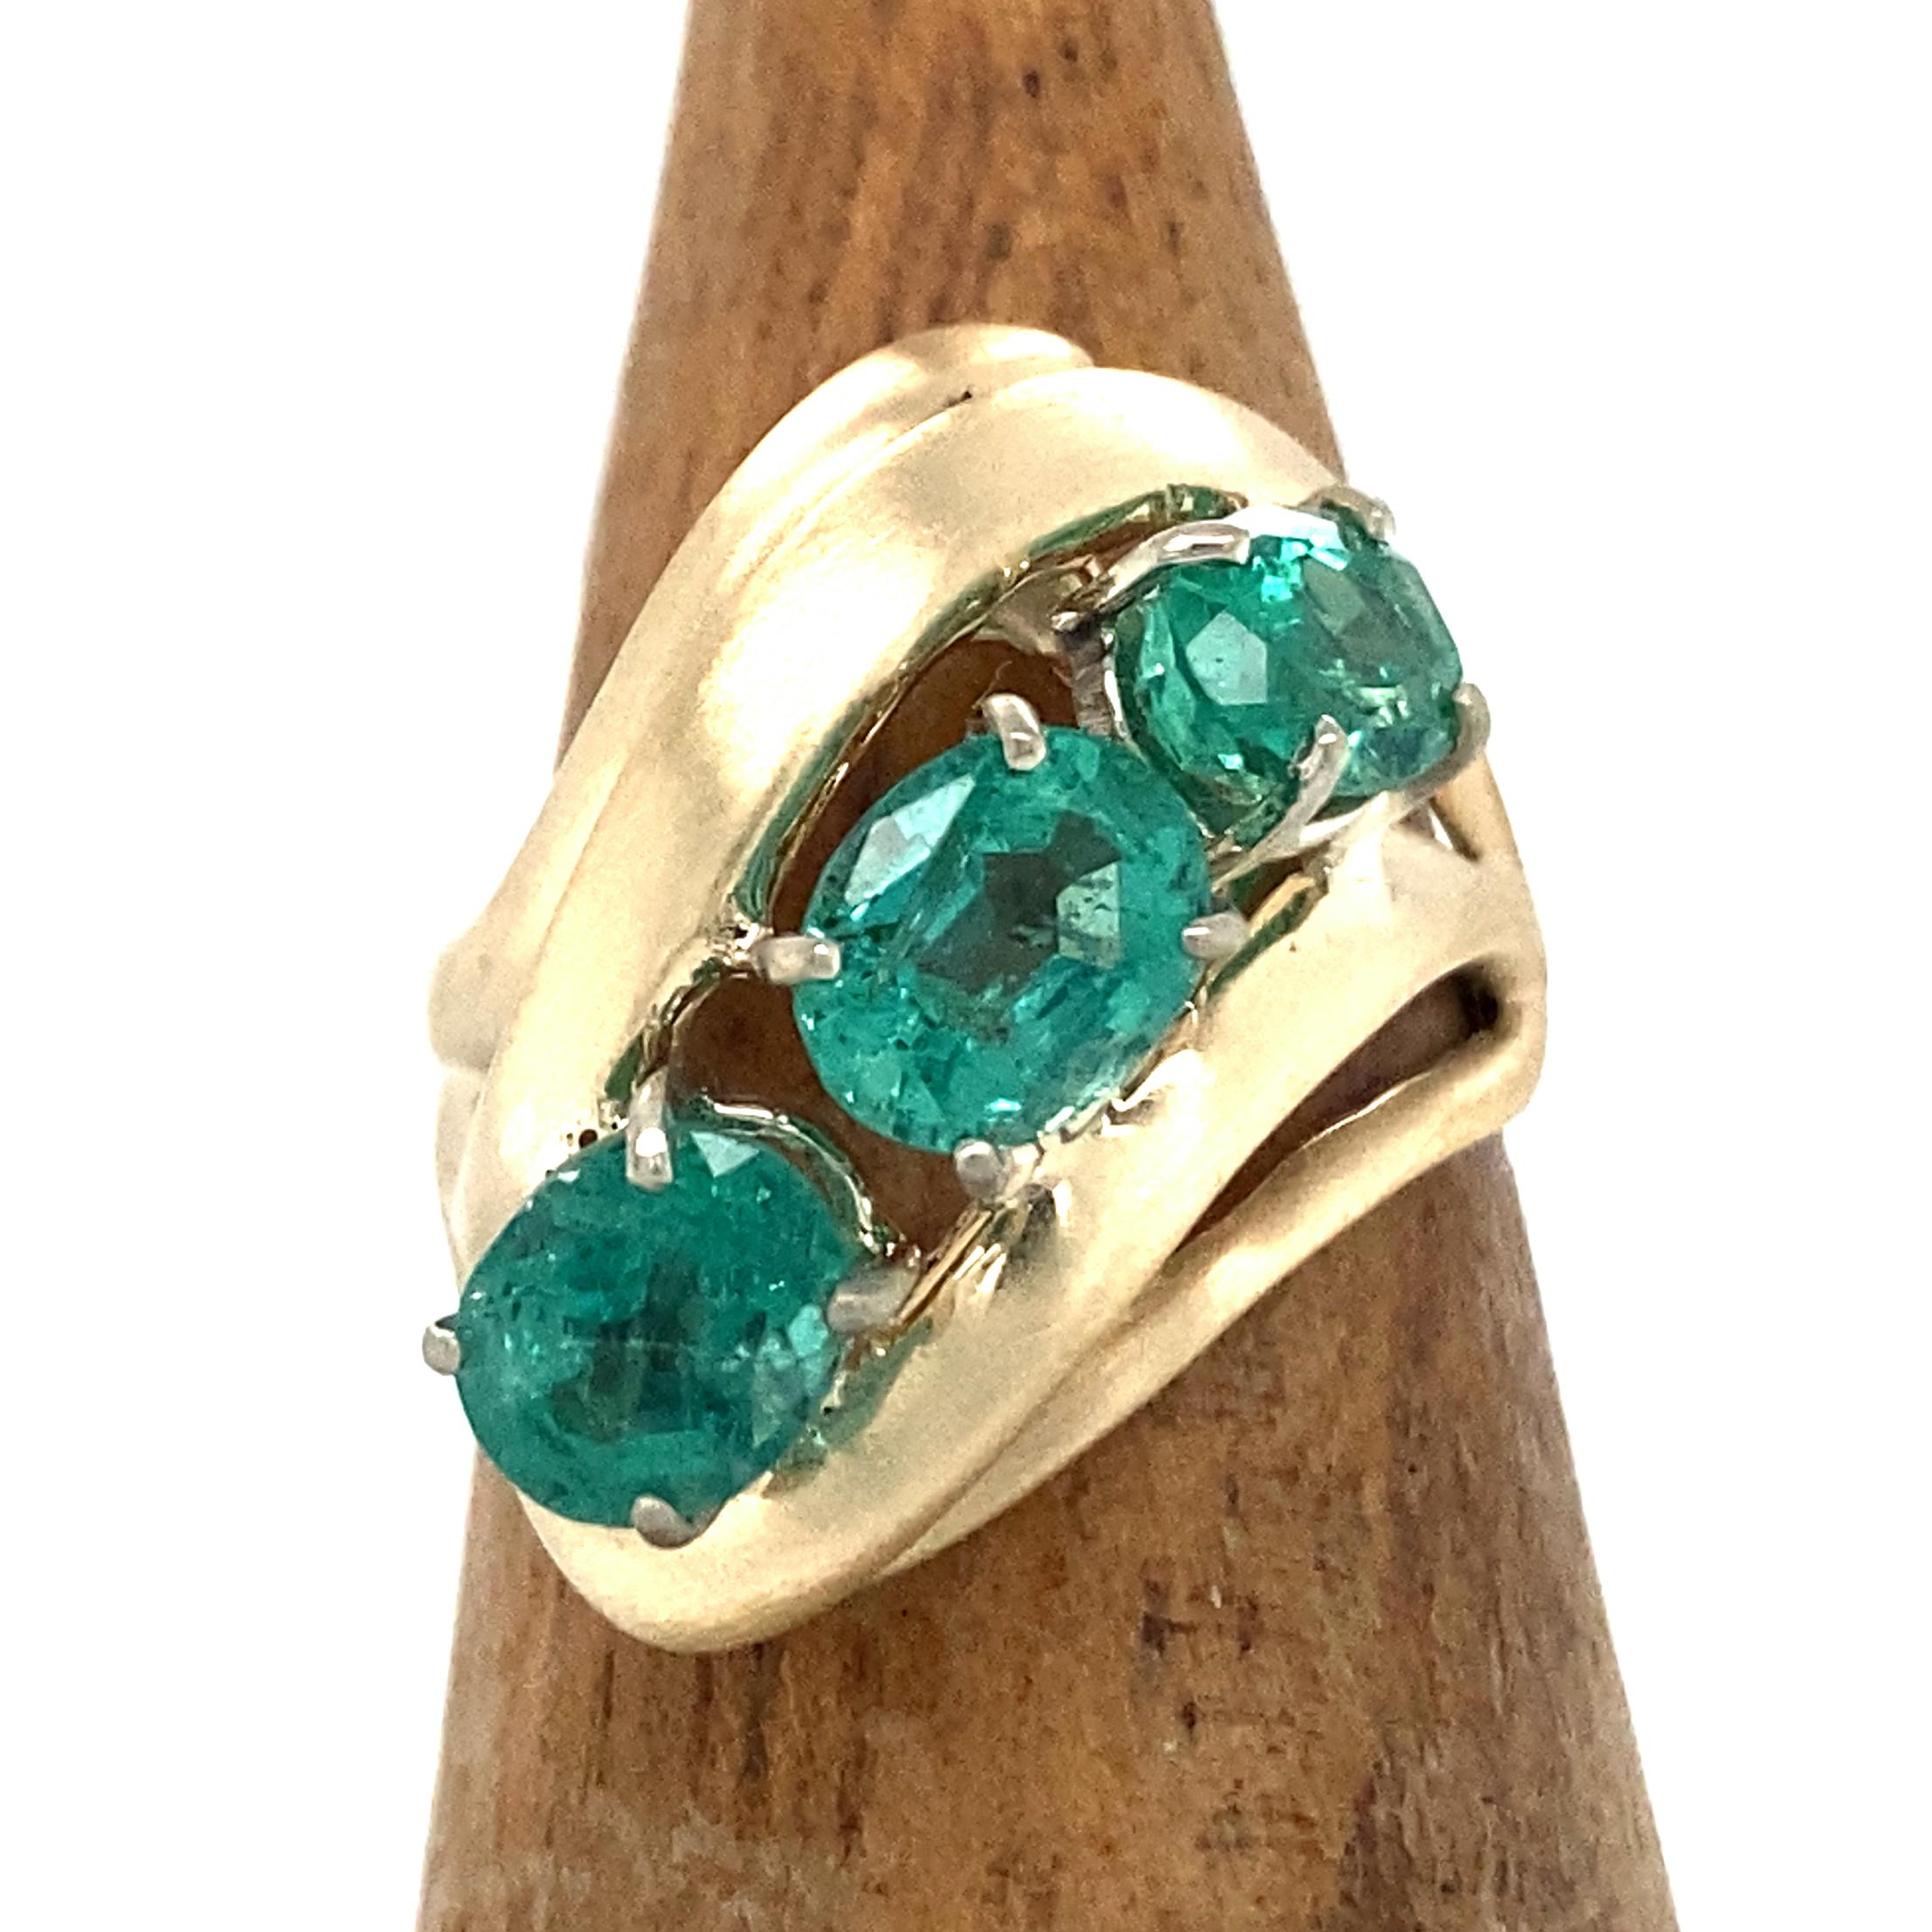 This 1970's cocktail ring came to us from a customer who wanted its original diamonds used for a custom project (with the gold mounting to be scrapped toward the final price).  We loved the groovy setting too much to consign it to the melting pot